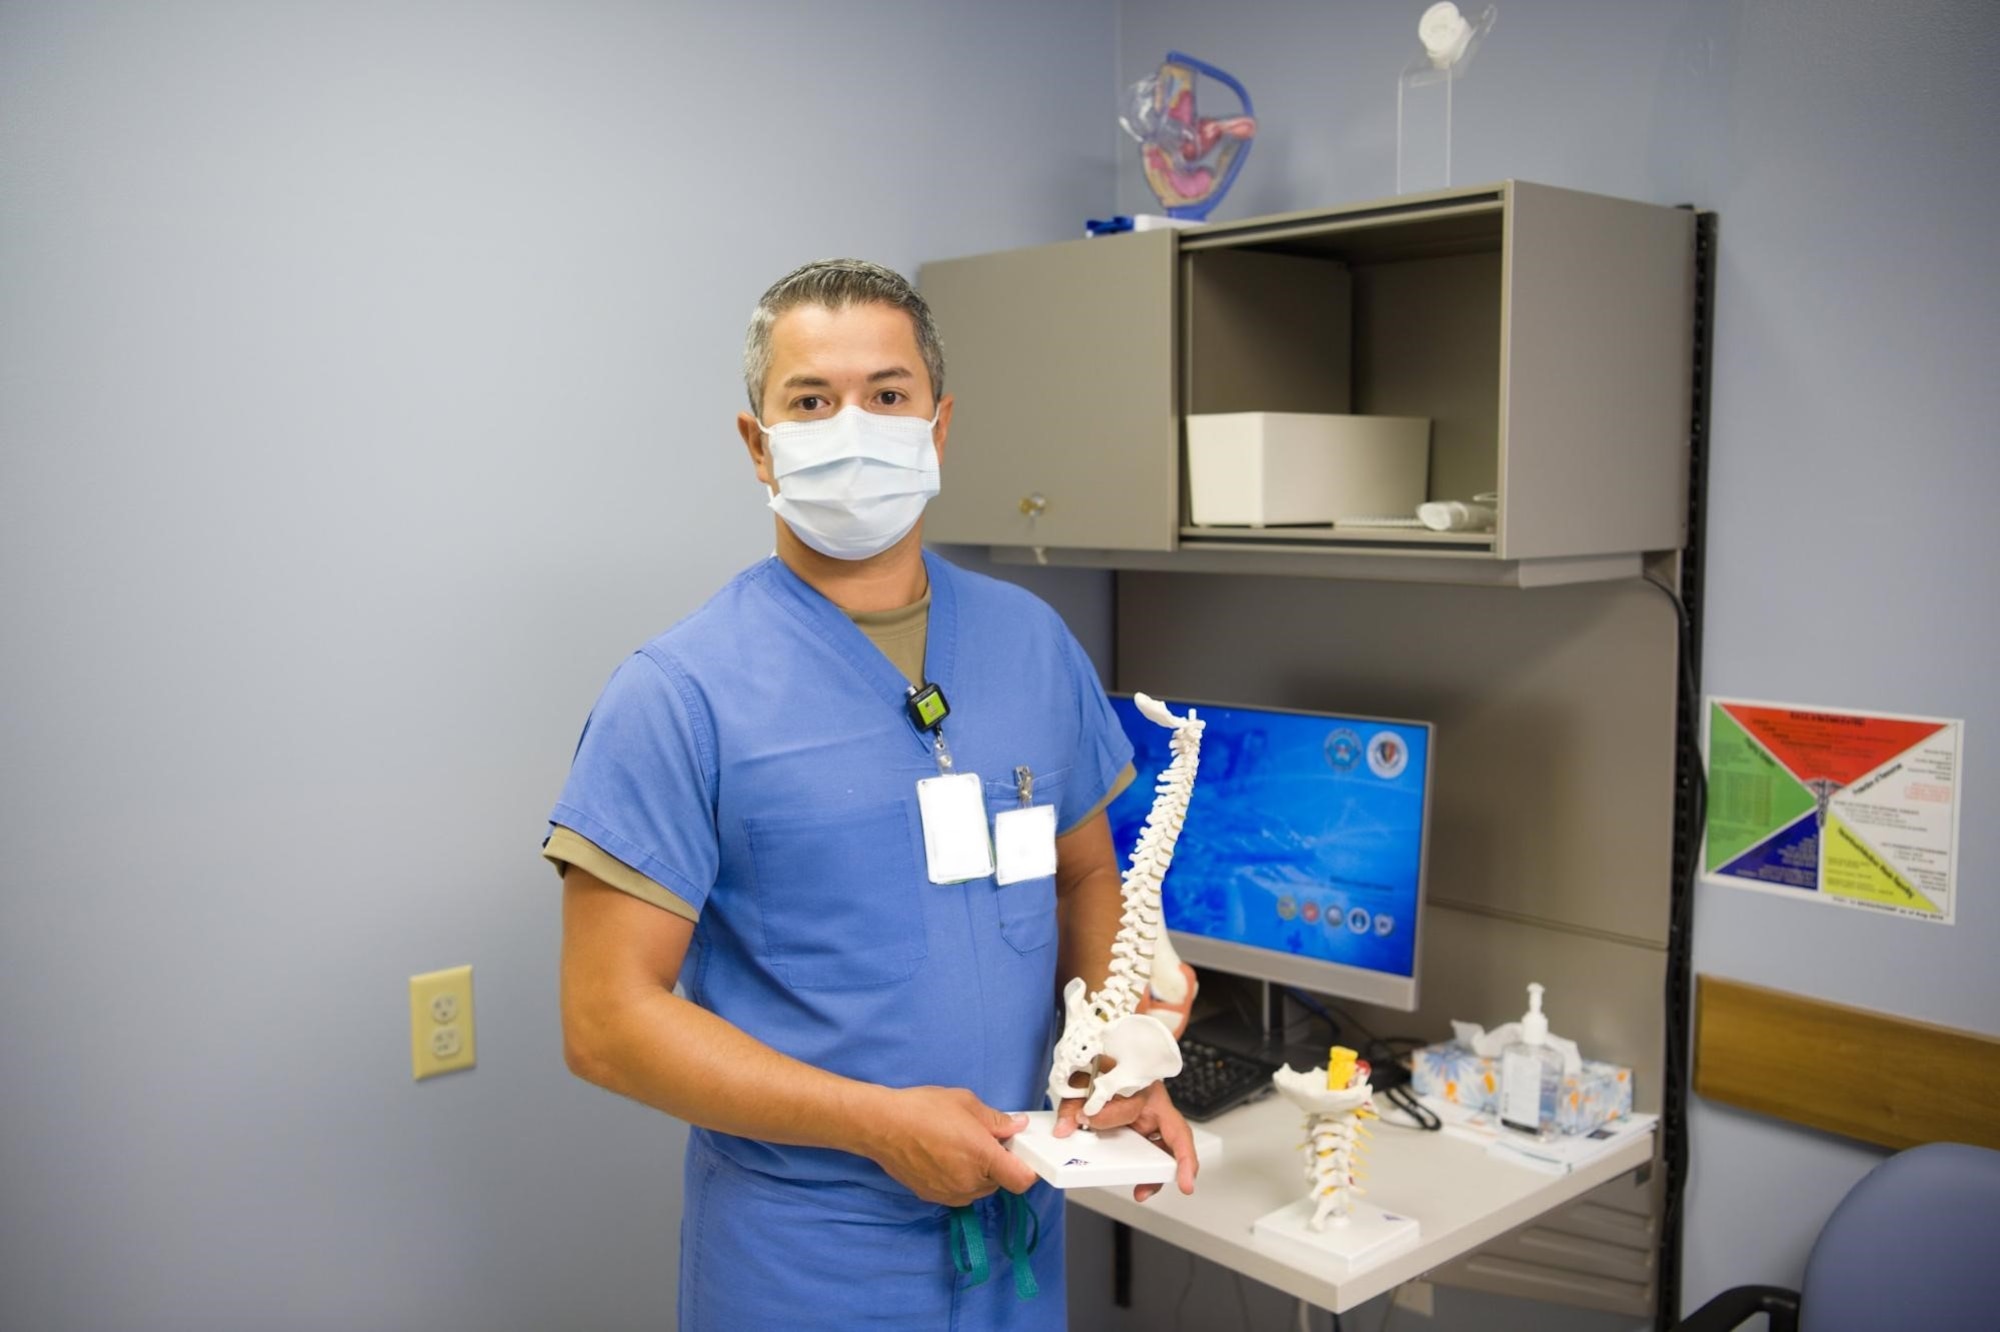 Capt. Juan Moreno, 15th Medical Group Active Duty Clinic physician assistant, holds a model of the human spine, to bring awareness to the musculoskeletal problems men face at Joint Base Pearl Harbor-Hickam, Hawaii, June 25, 2020. The 15th MDG provides both in-person and virtual medical appointments to Airmen during the COVID-19 pandemic and can assist with men’s health issues. (U.S. Air Force Illustration by 2nd Lt. Benjamin Aronson)